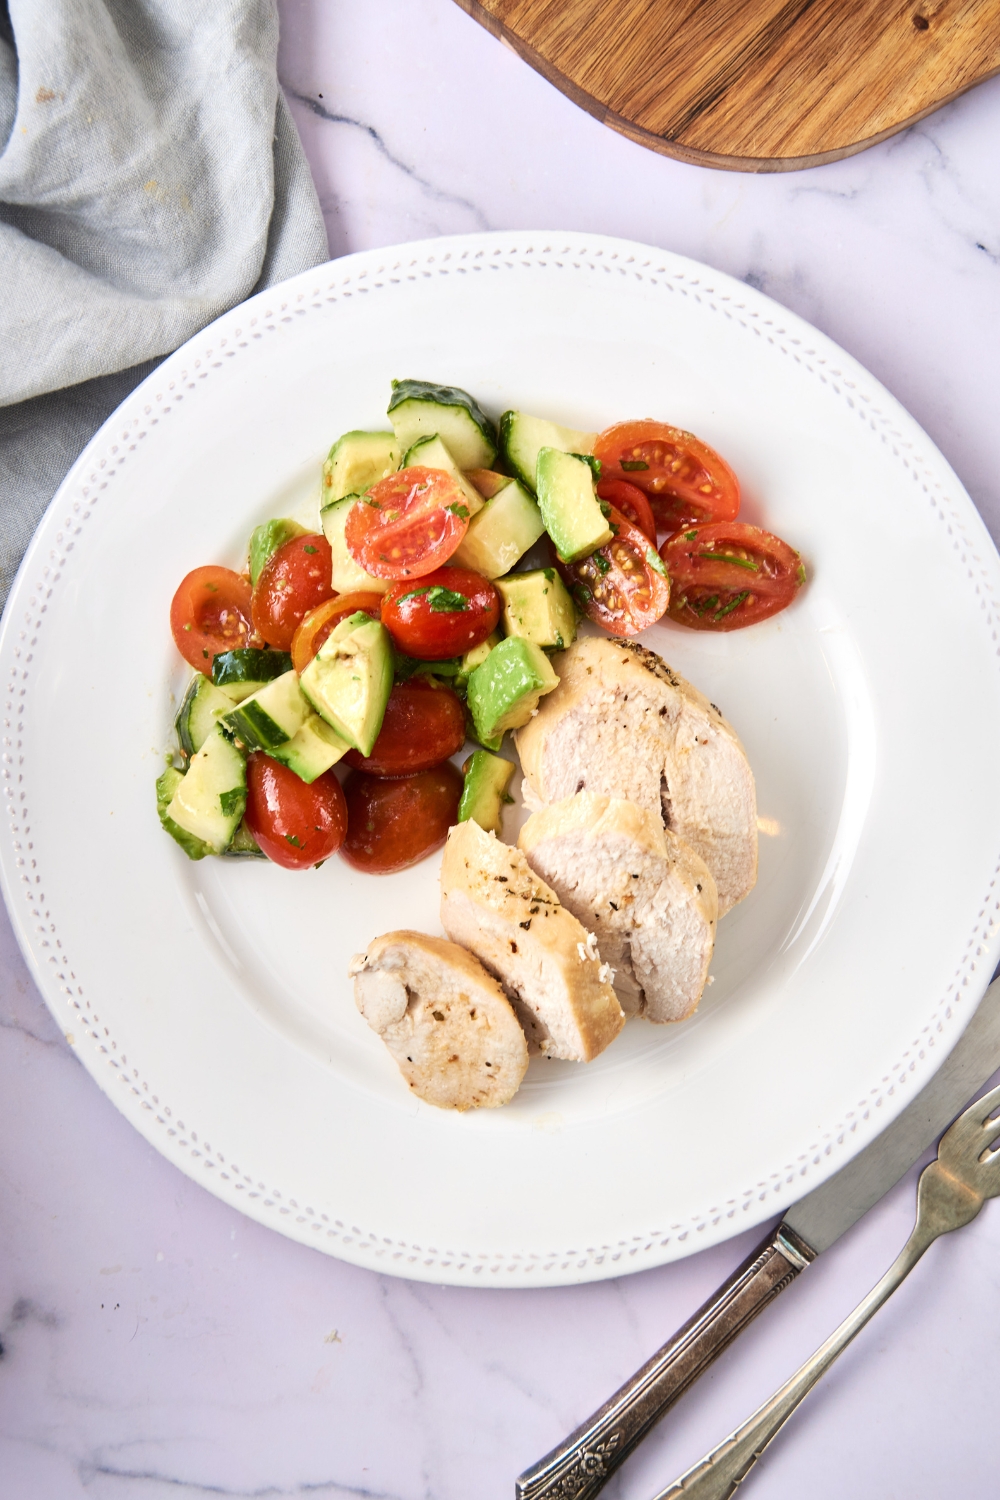 Sliced chicken breast and veggies are on a white plate. Serving utensils are beside it.